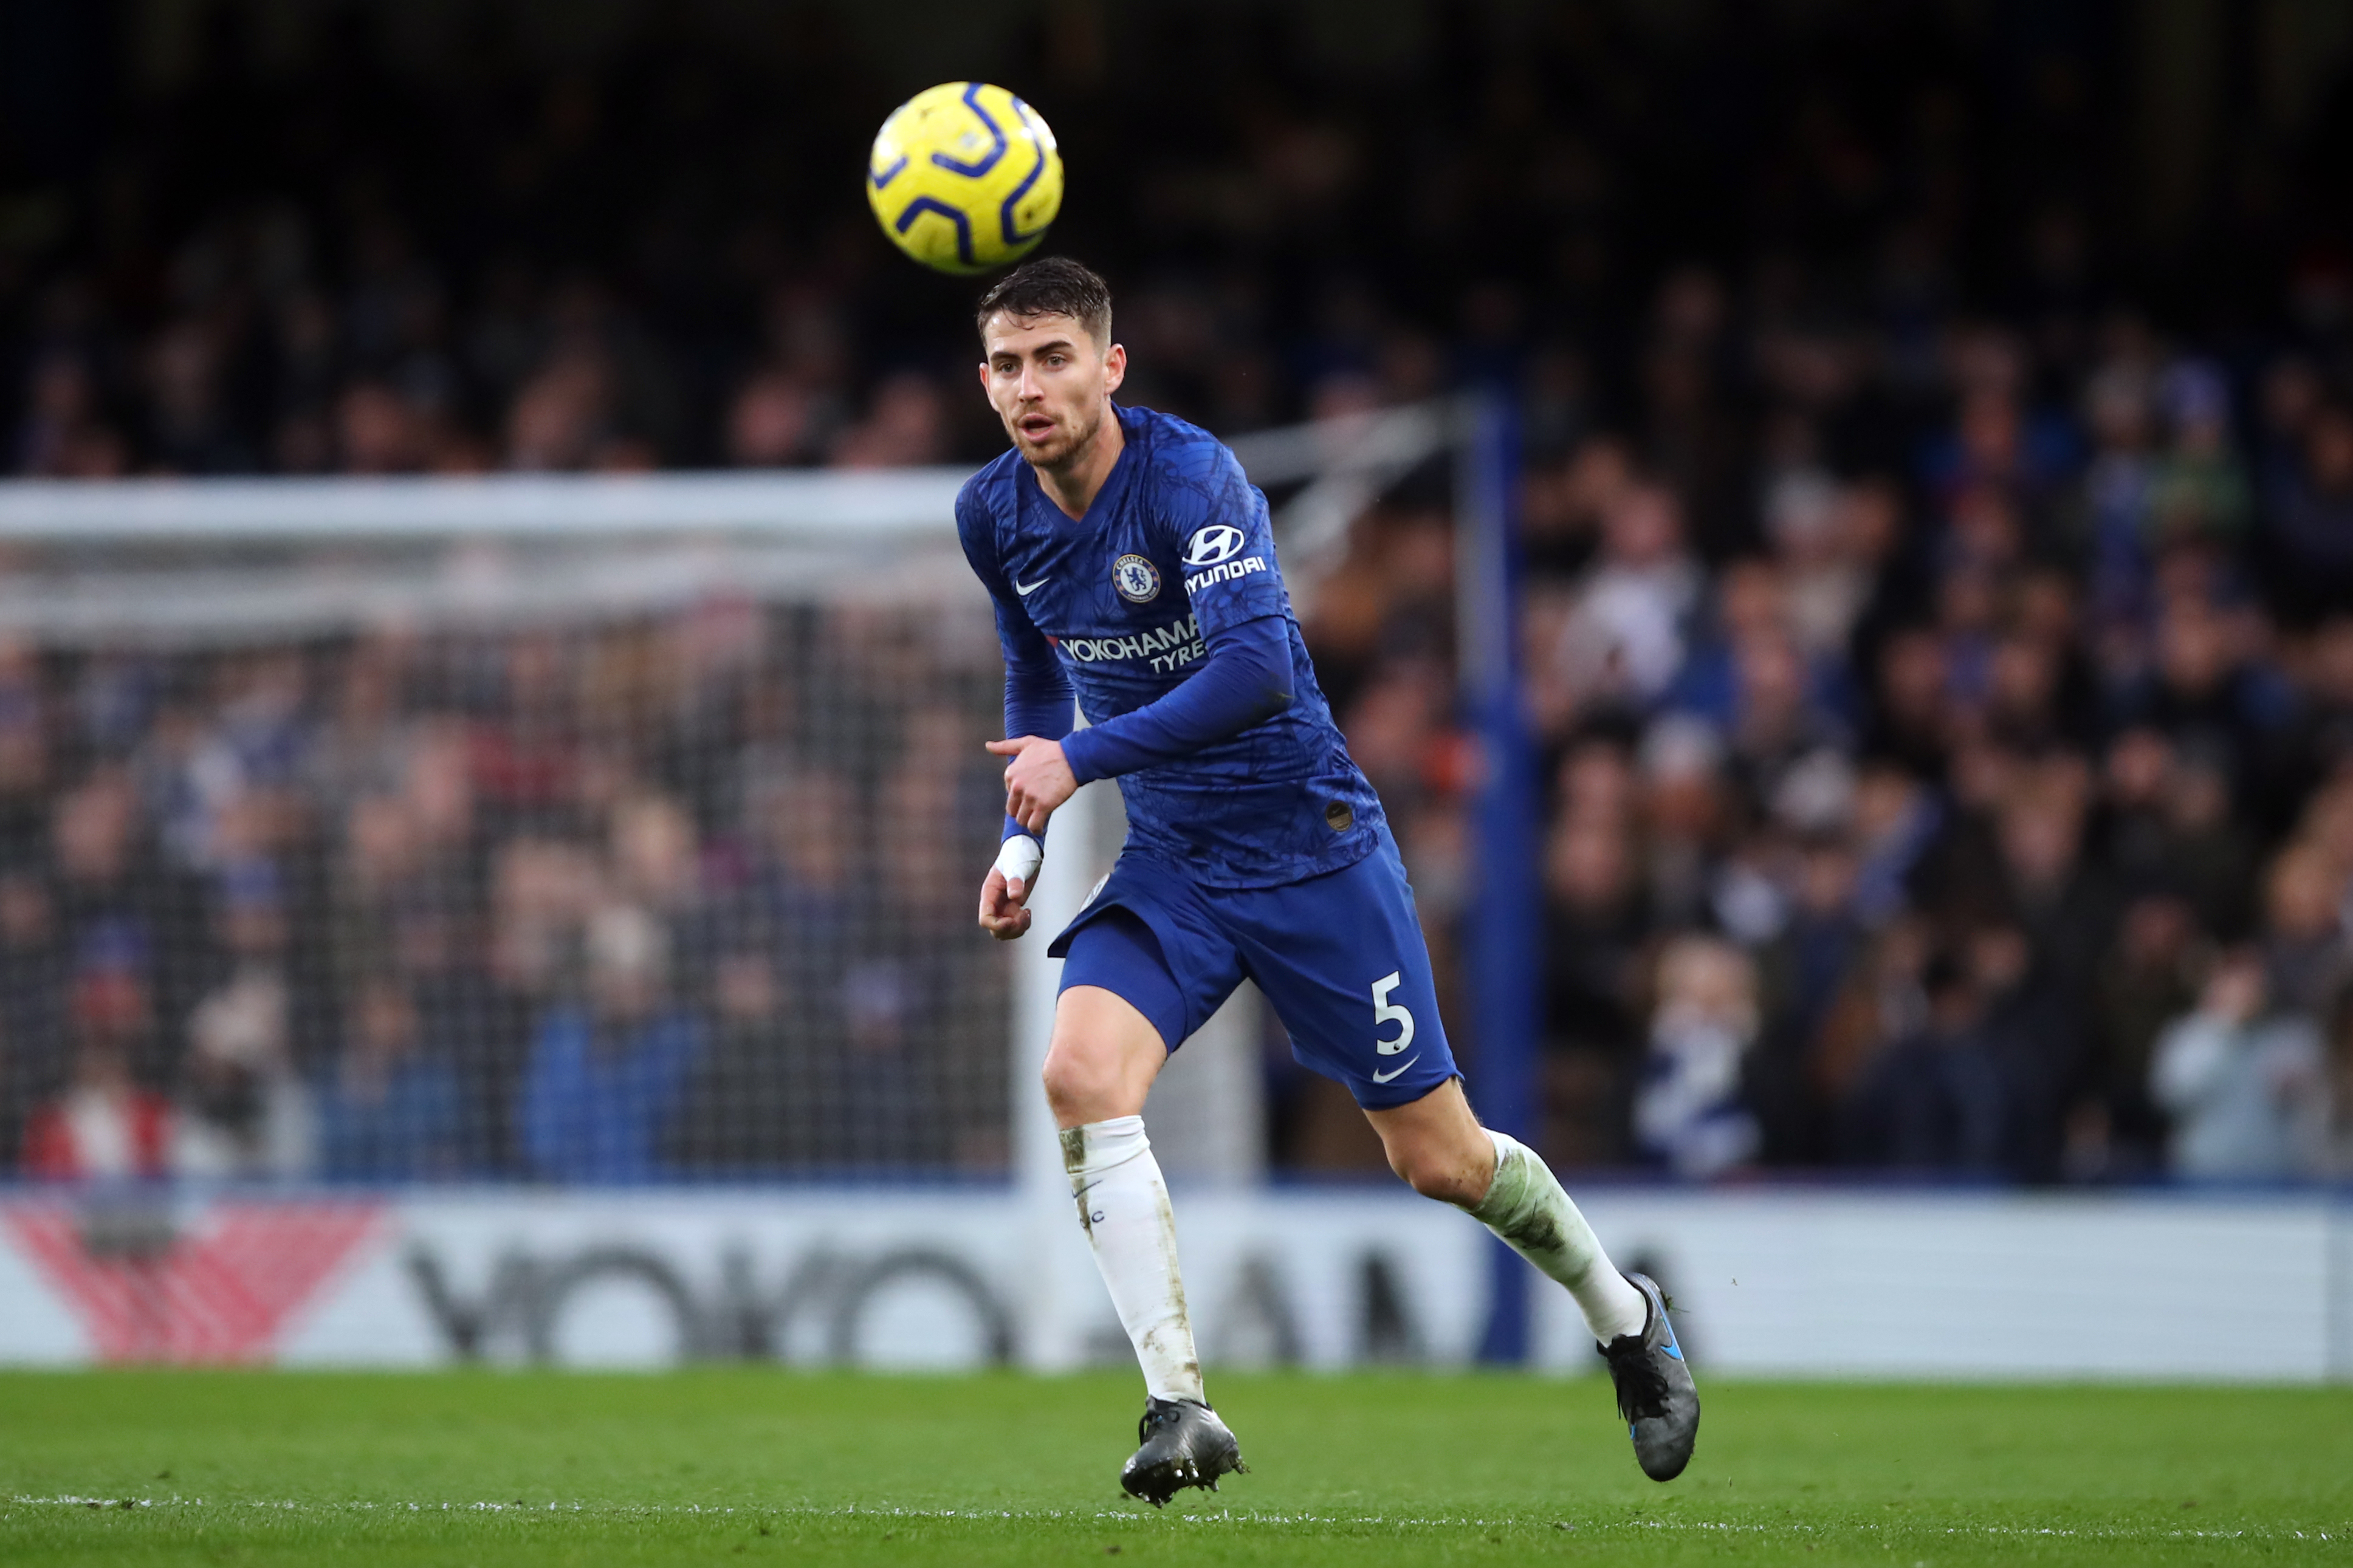 Much of what Chelsea are able to do on Sunday against Manchester United will depend on Jorginho's effectiveness in midfield. (Picture Courtesy - AFP/Getty Images)